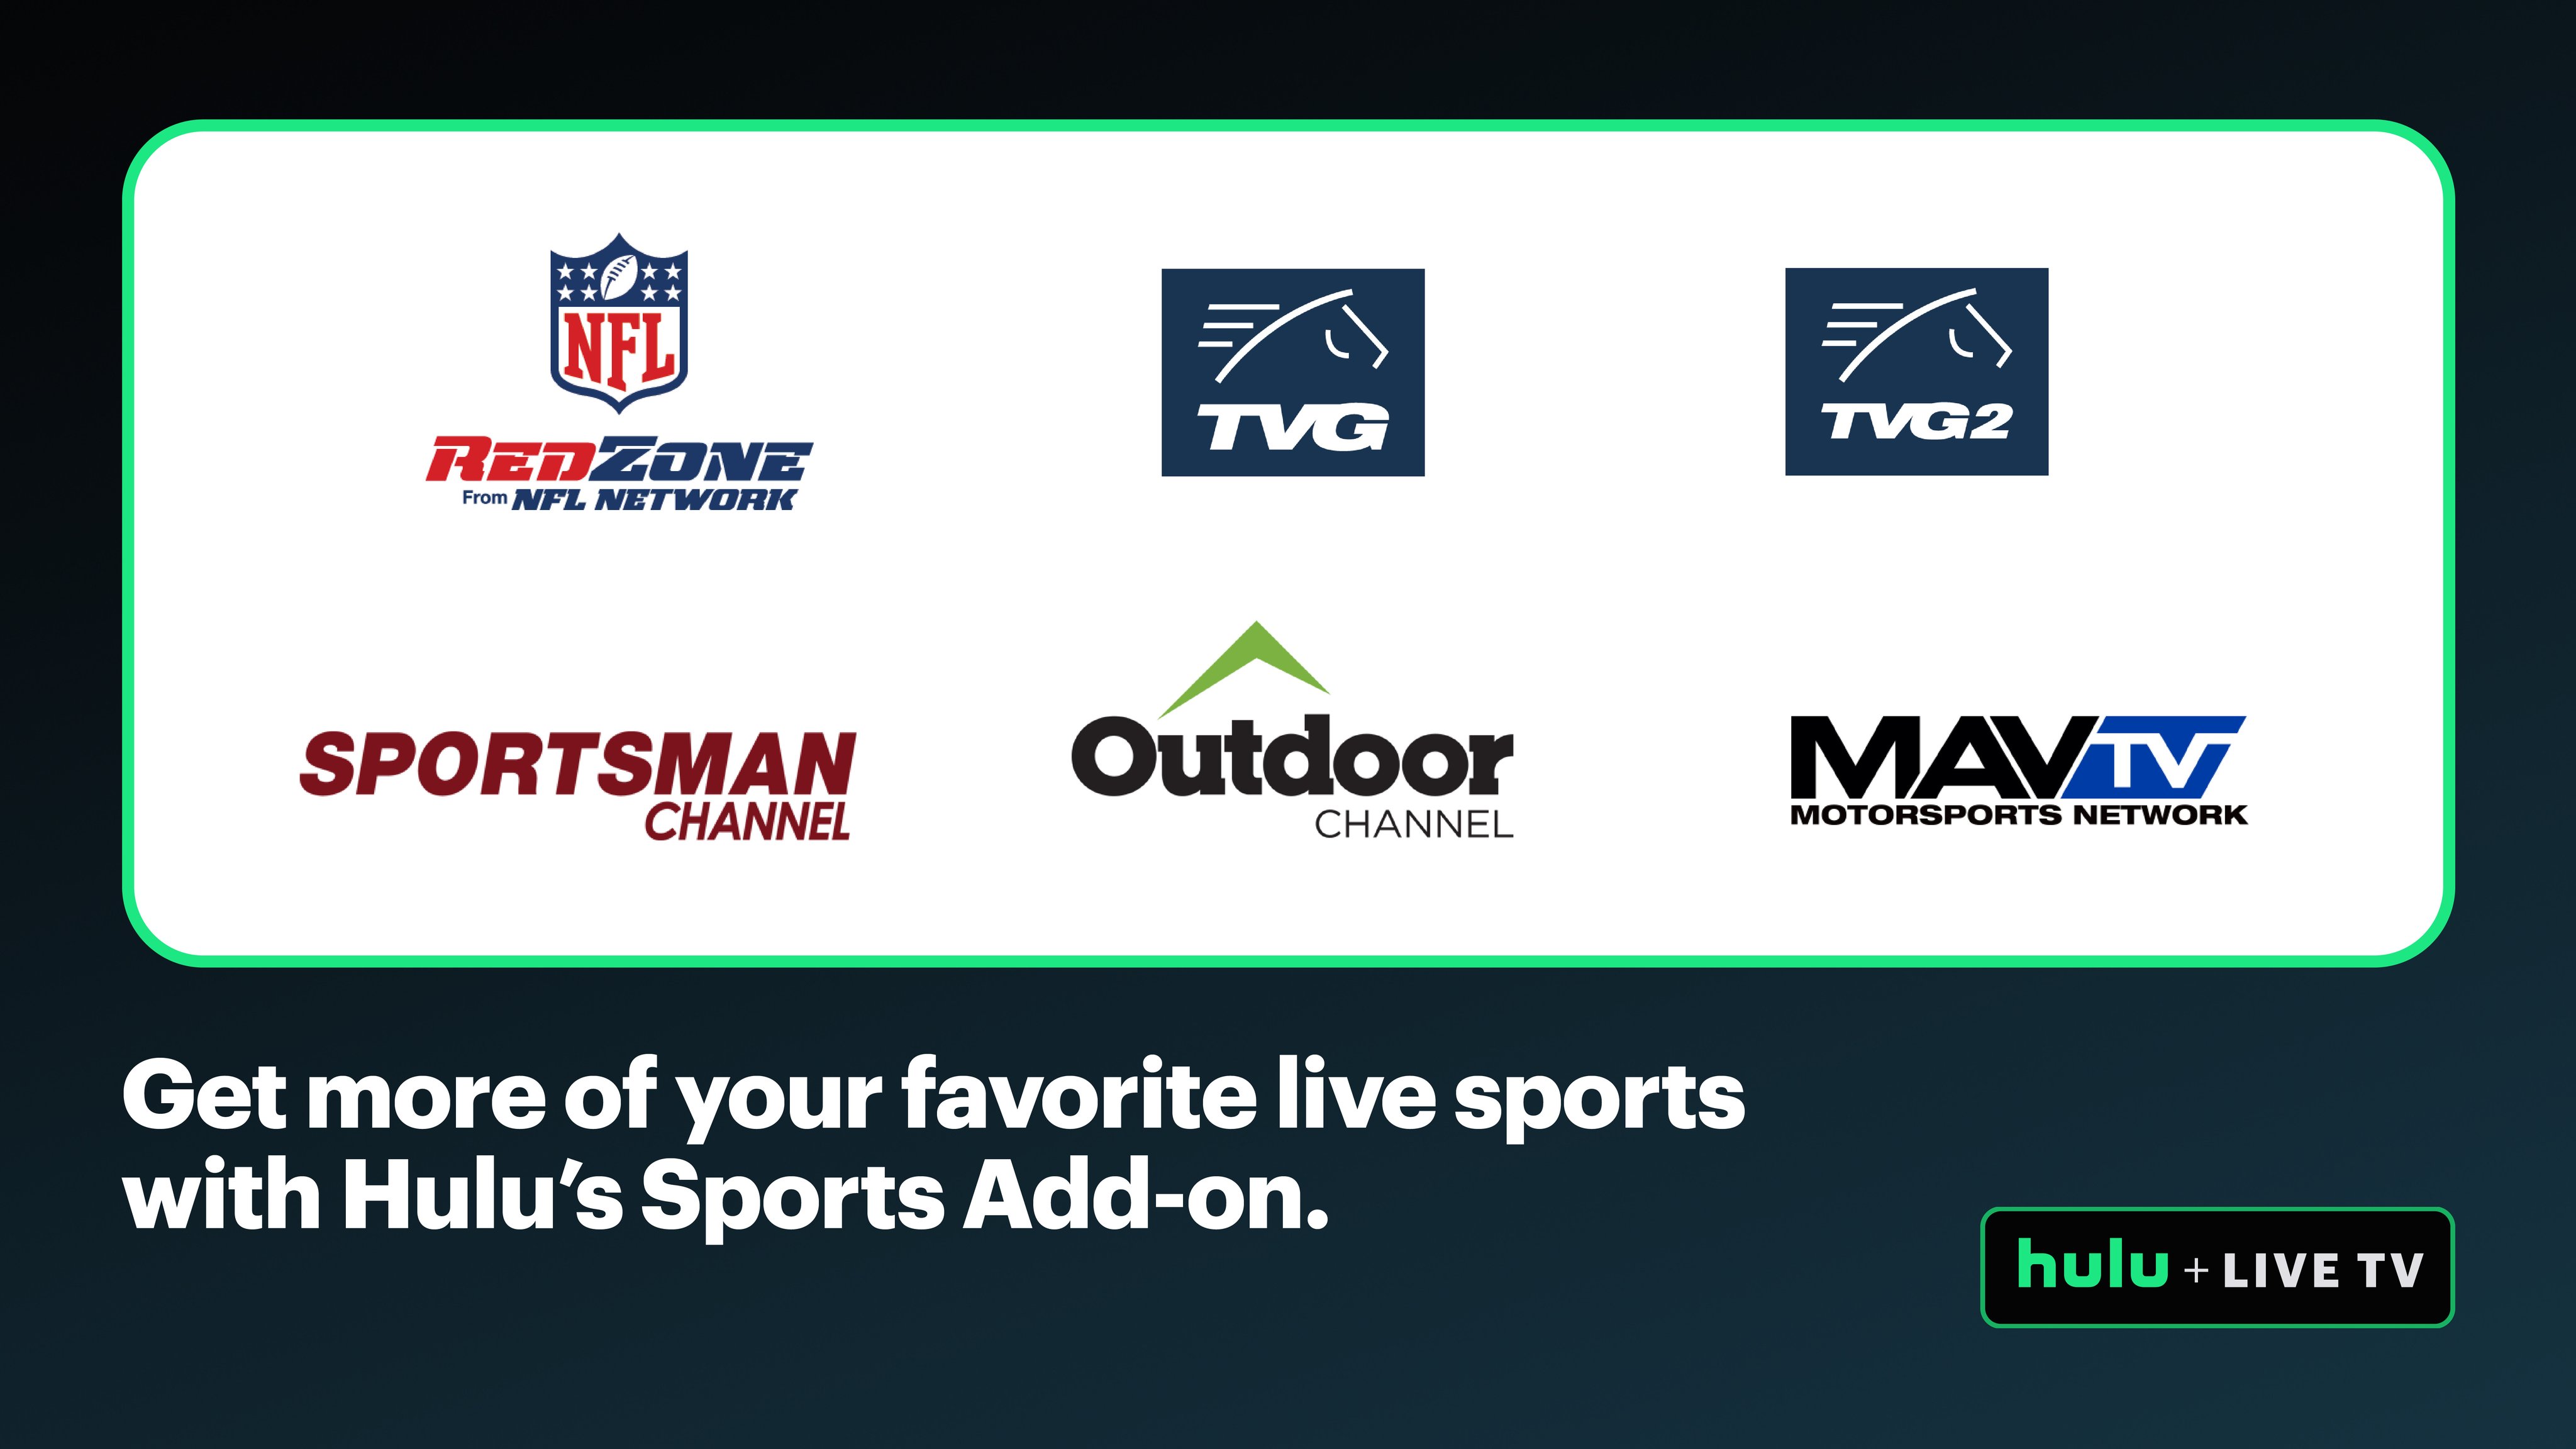 Hulu Support on X: 'With Hulu's Sports Add-on, Live TV subscribers can get  their extra sports fix with access to NFL RedZone, TVG, TVG2, MAVTV,  Outdoor Channel, and Sportsman Channel. Learn more: